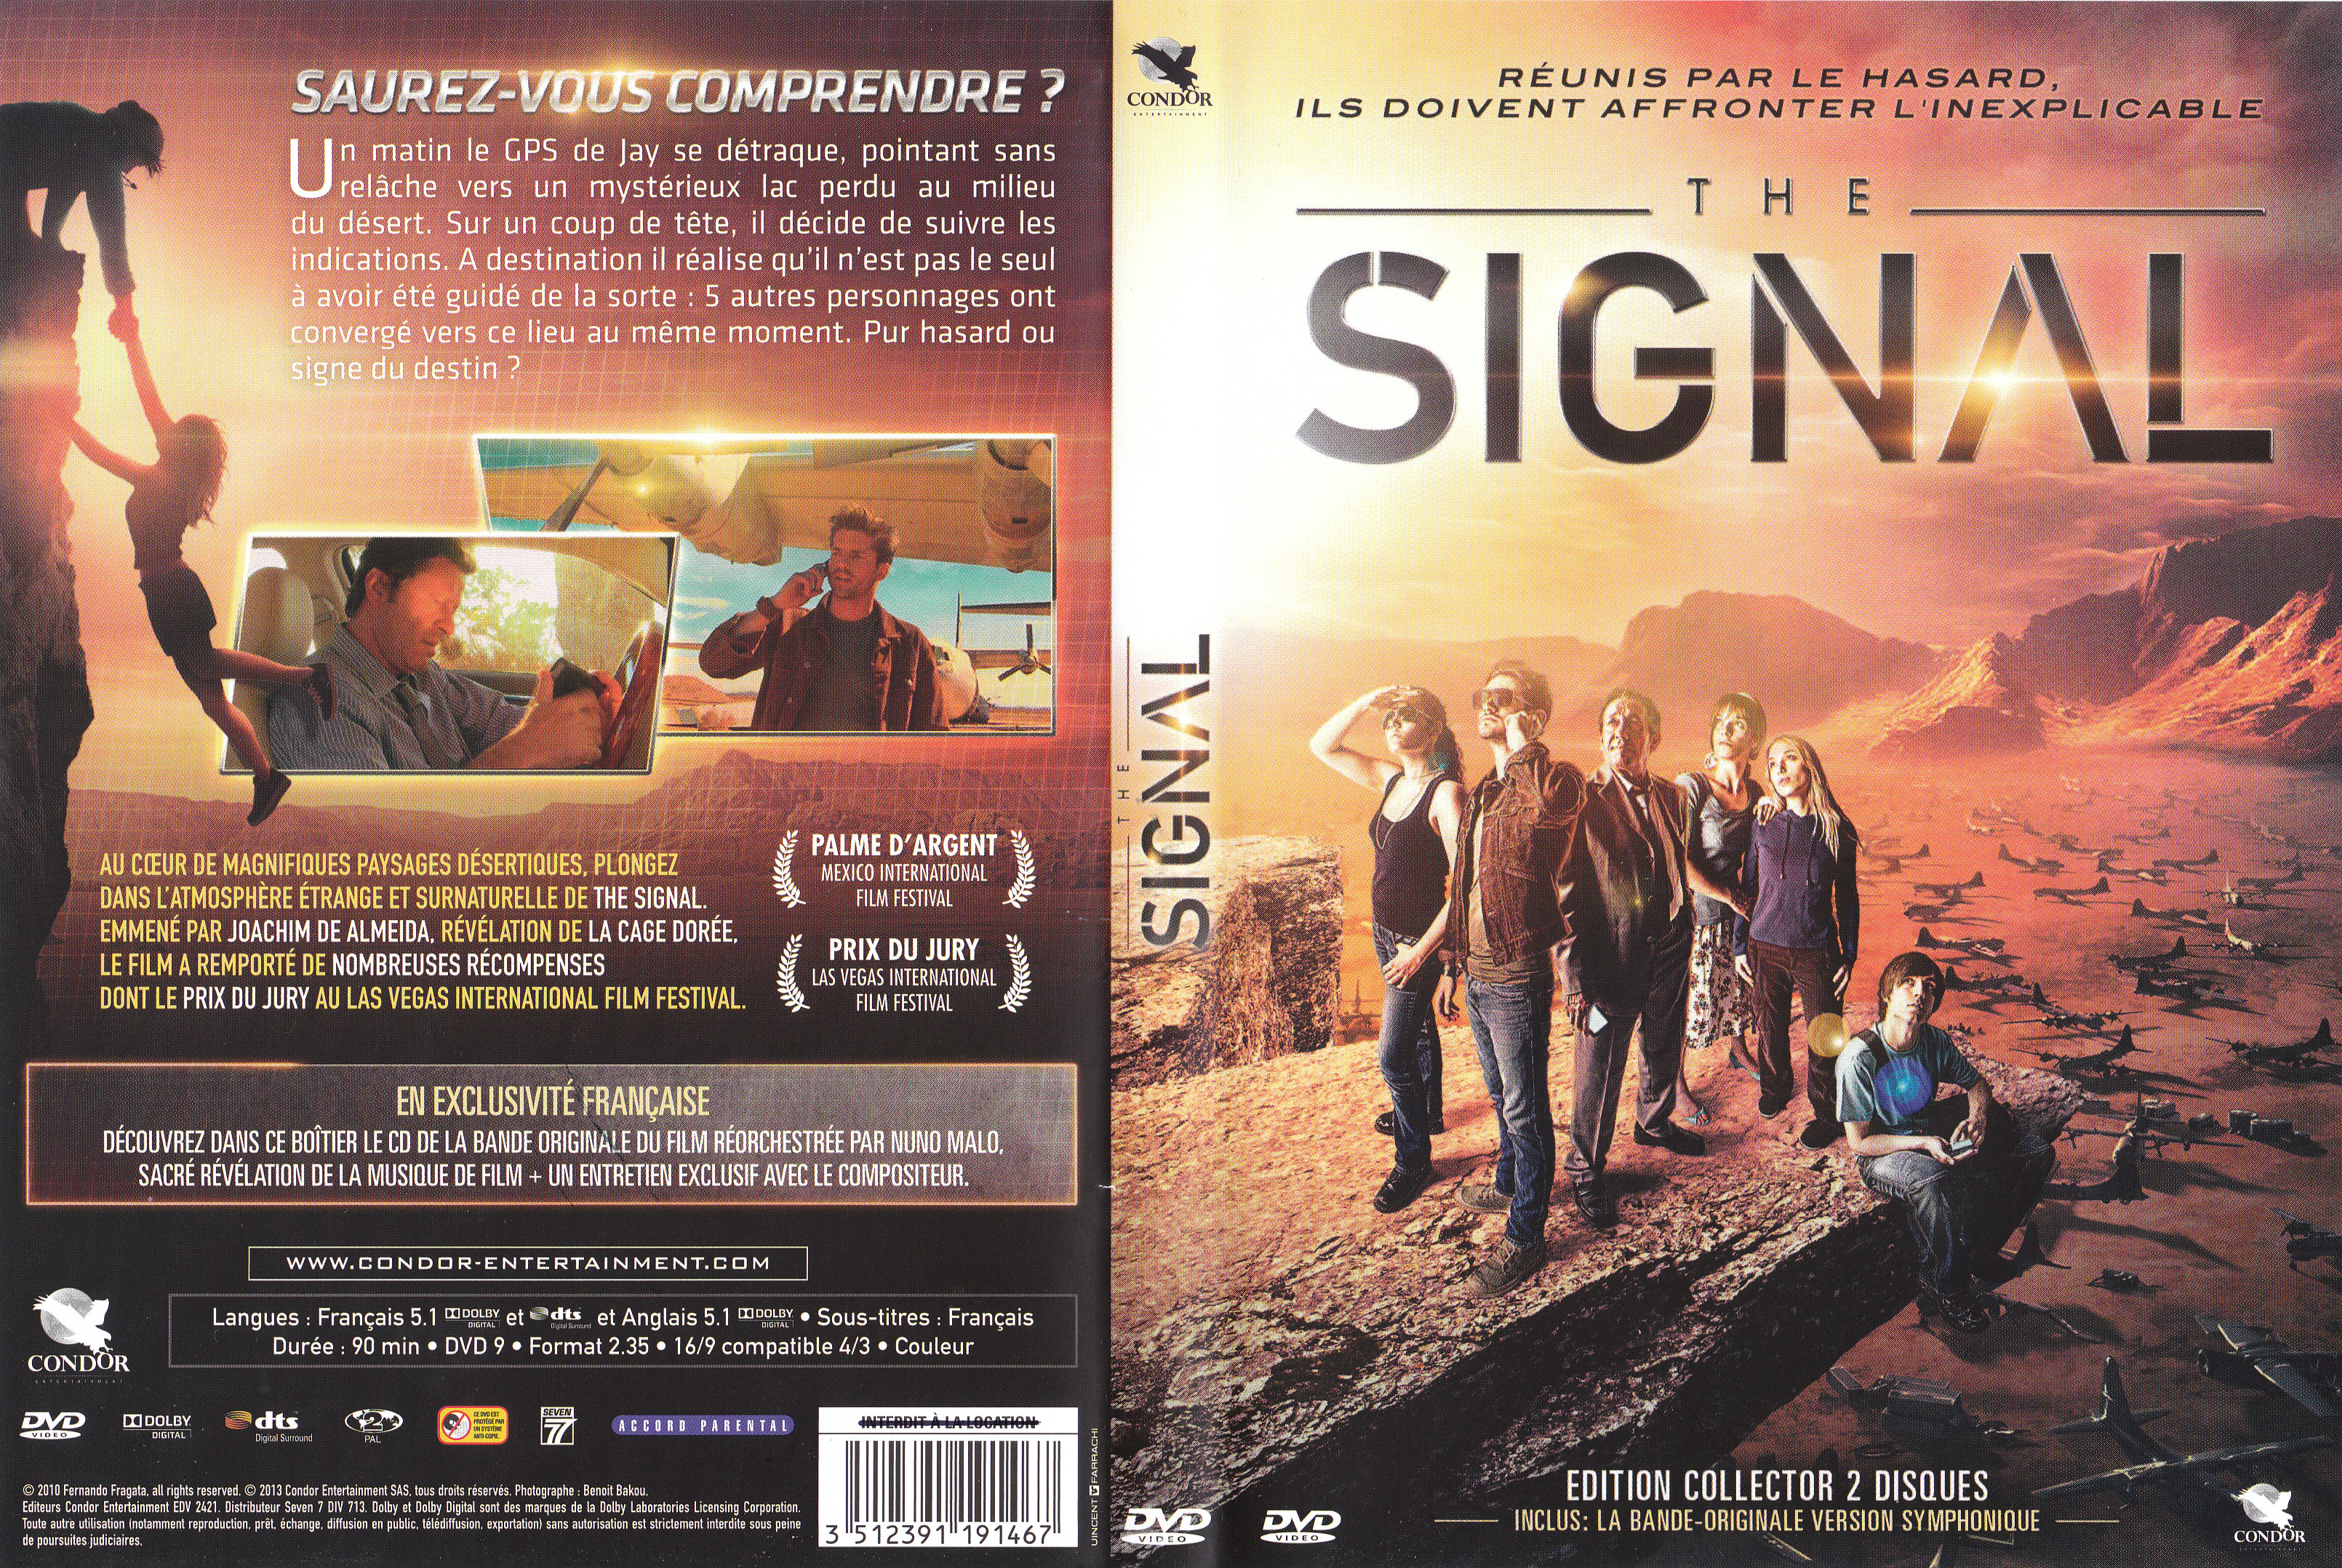 Jaquette DVD The signal (2010)